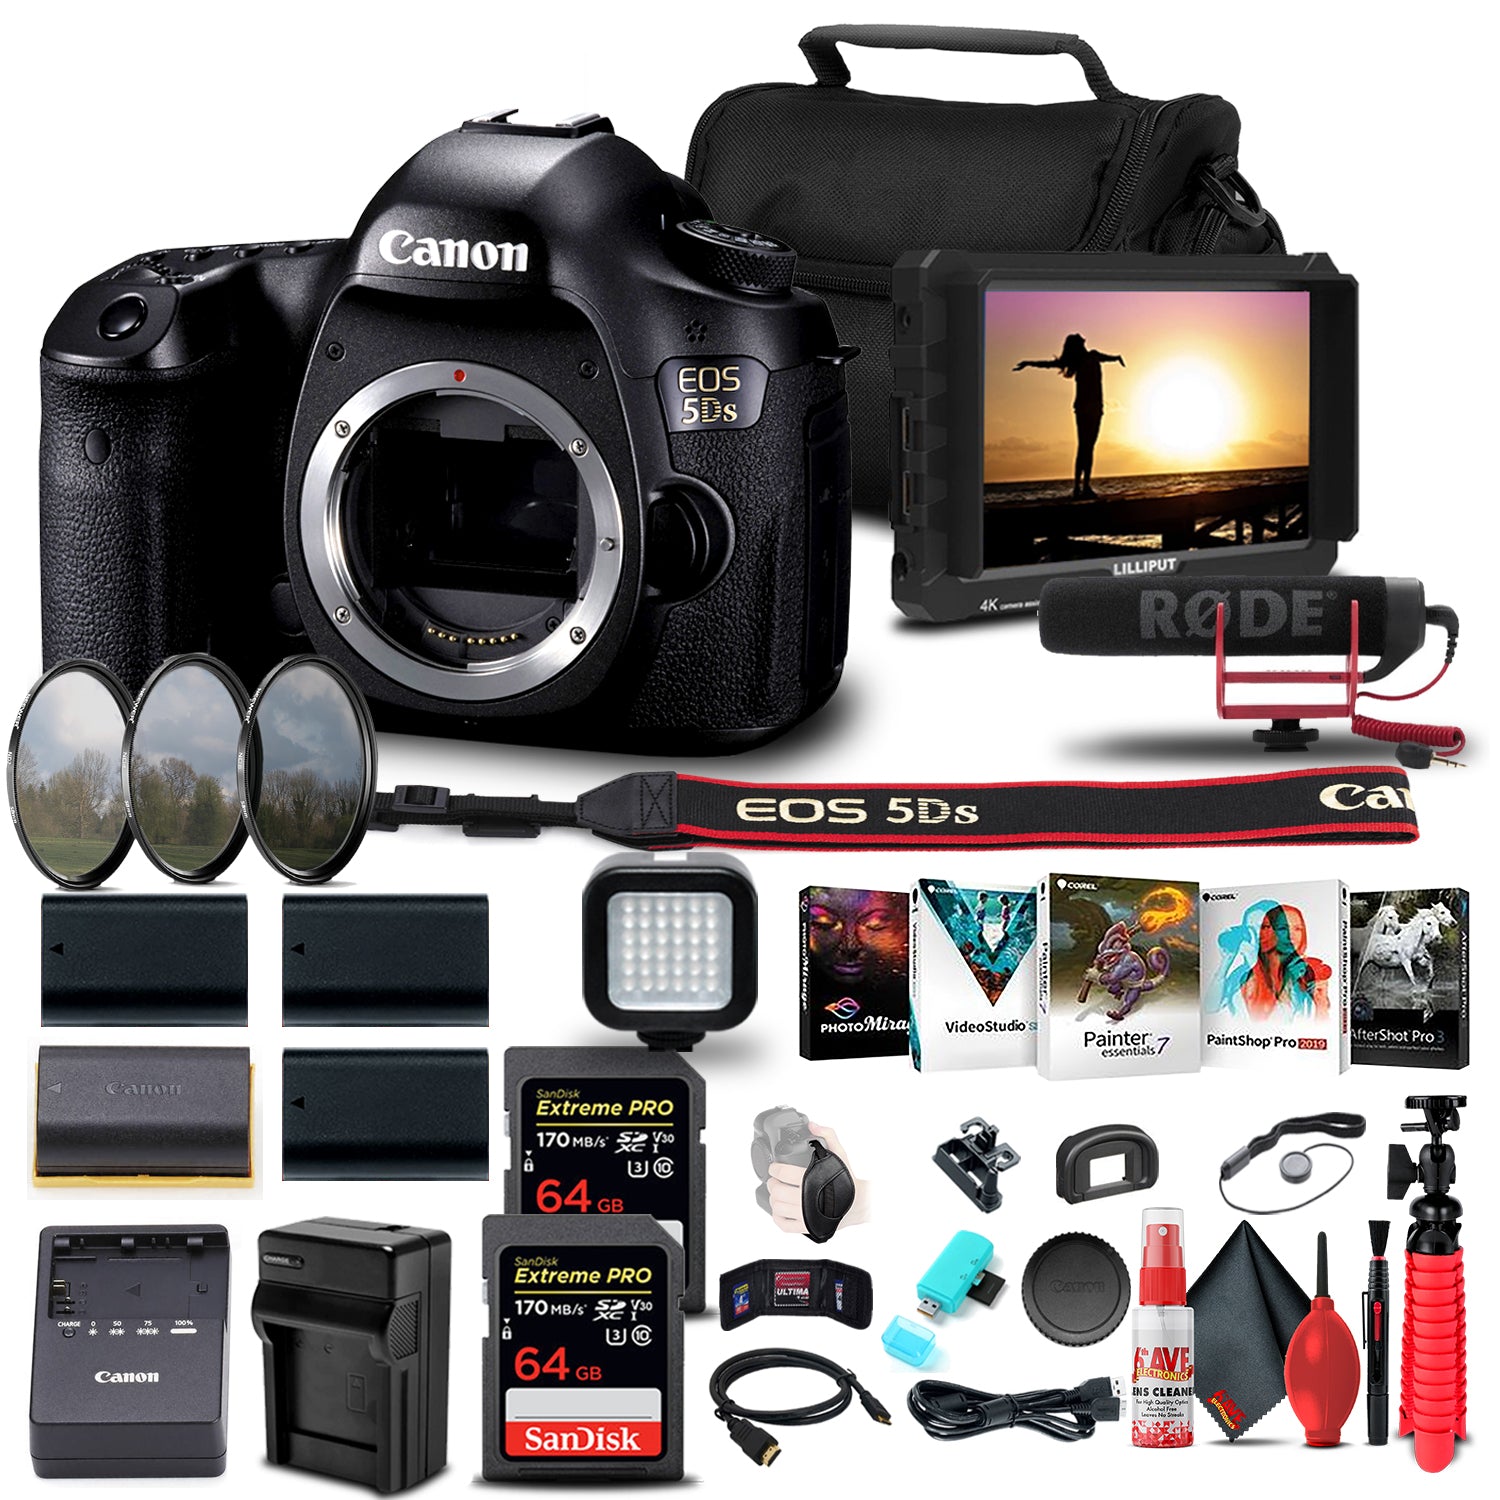 Canon EOS 5DS DSLR Camera (Body Only) + 4K Monitor + Pro Mic + More Bundle